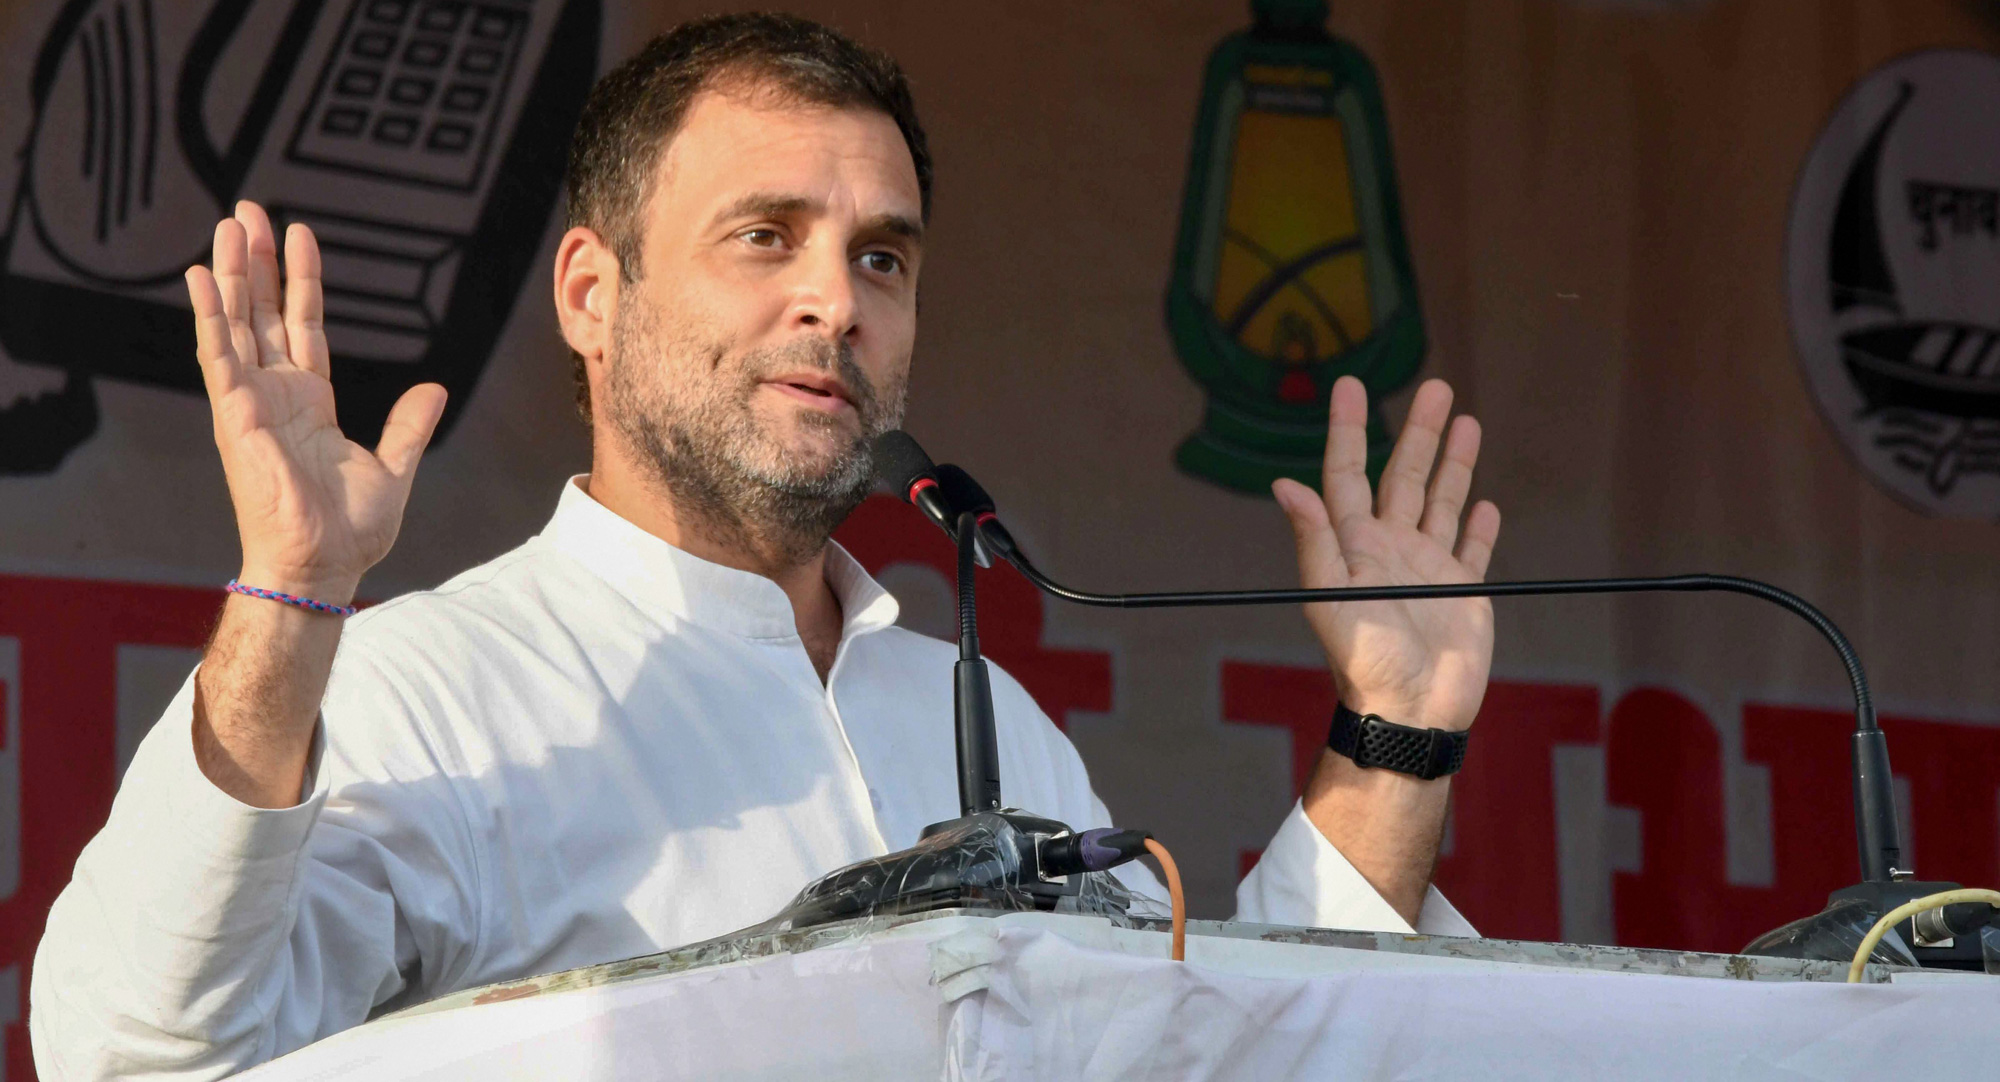 Congress President Rahul Gandhi addresses an election campaign rally for the Lok Sabha polls, in Gaya on Tuesday, April 9, 2019.